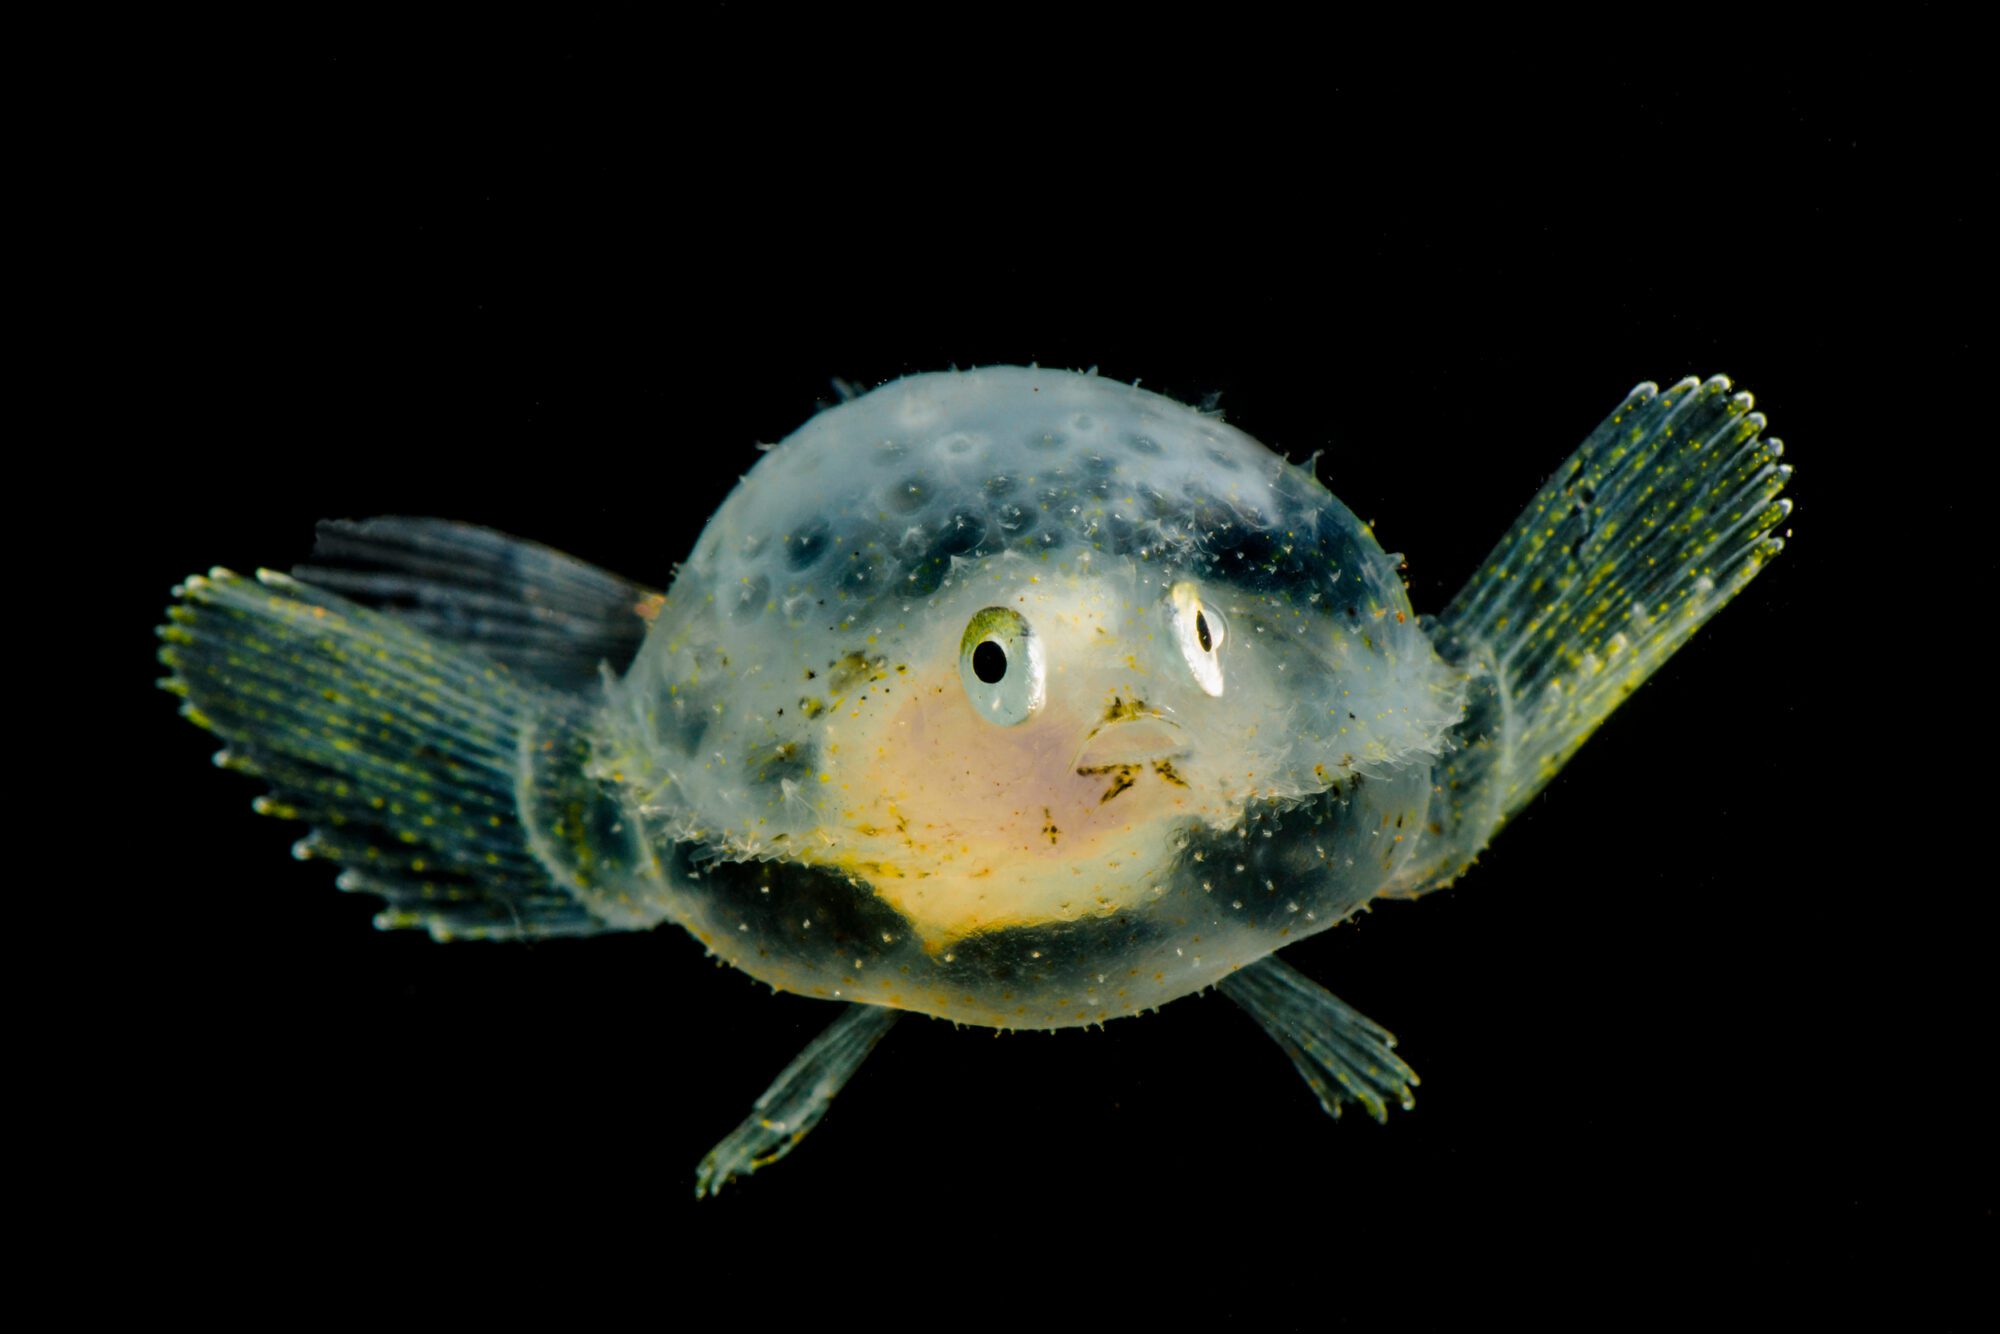 A black background shows off the translucent oval fish with two fins and two feet. Its eyes are on either side of its face and it looks to be smiling, the only solid part of the fish is its yellow internal body, the rest is almost entirely seethrough